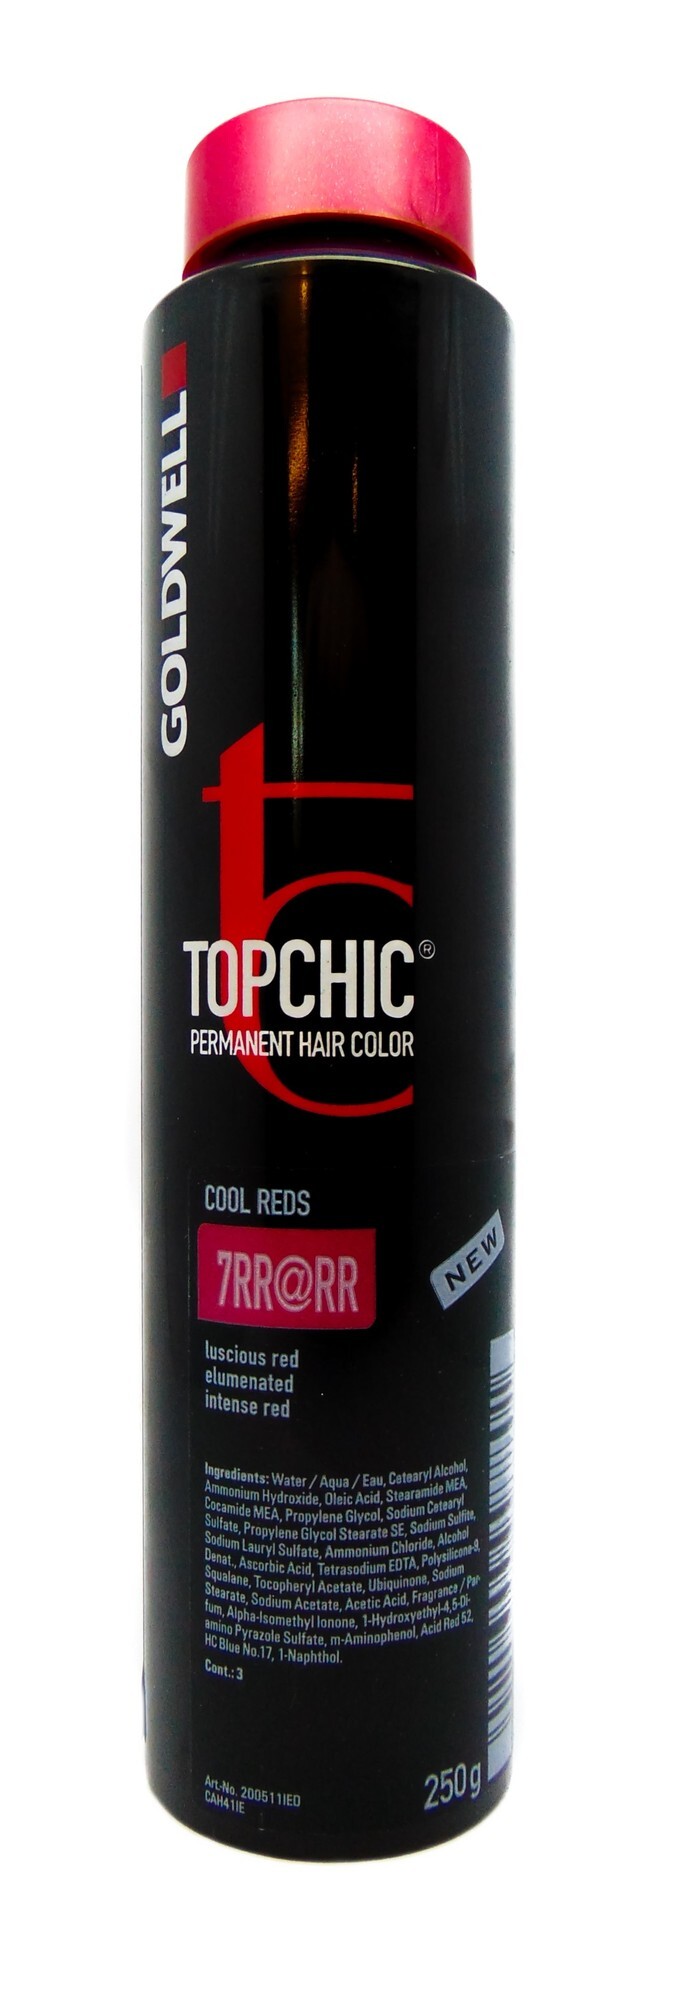 Goldwell Topchic The Red Collection Hair Color Bus 7RR@RR 250ml